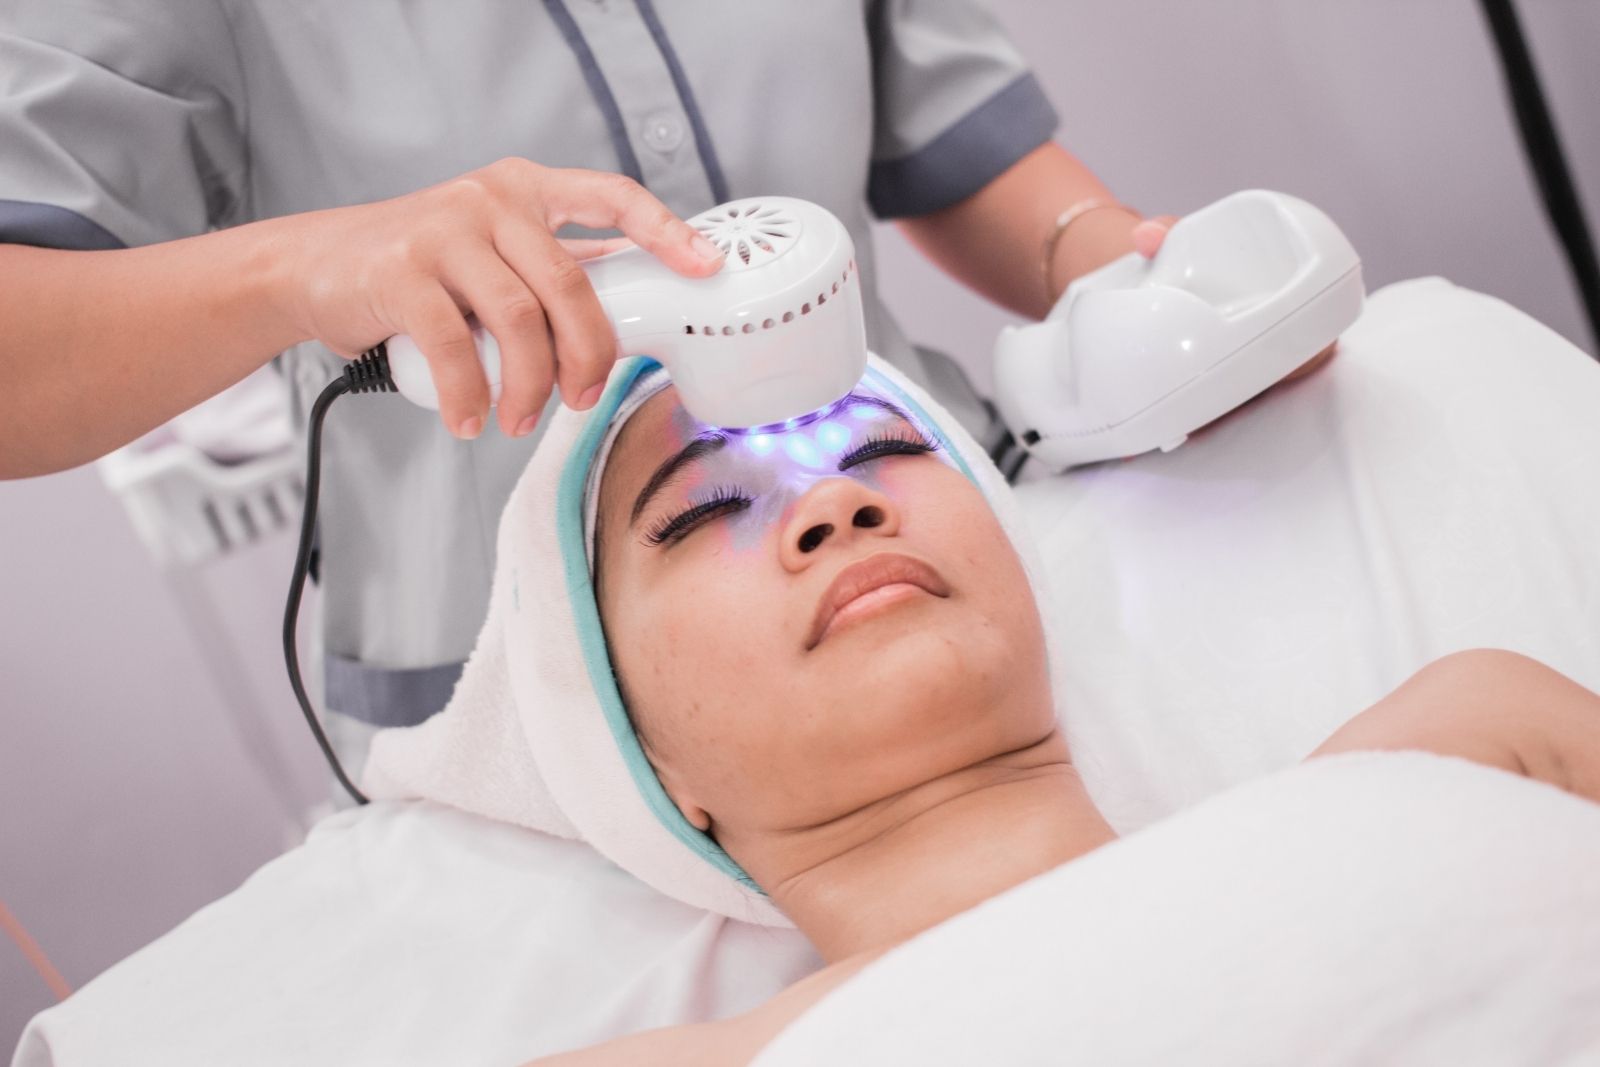 Skin Tightening Treatments To Target Loose Skin After Weight Loss -  Radiance Skincare & Laser Medspa